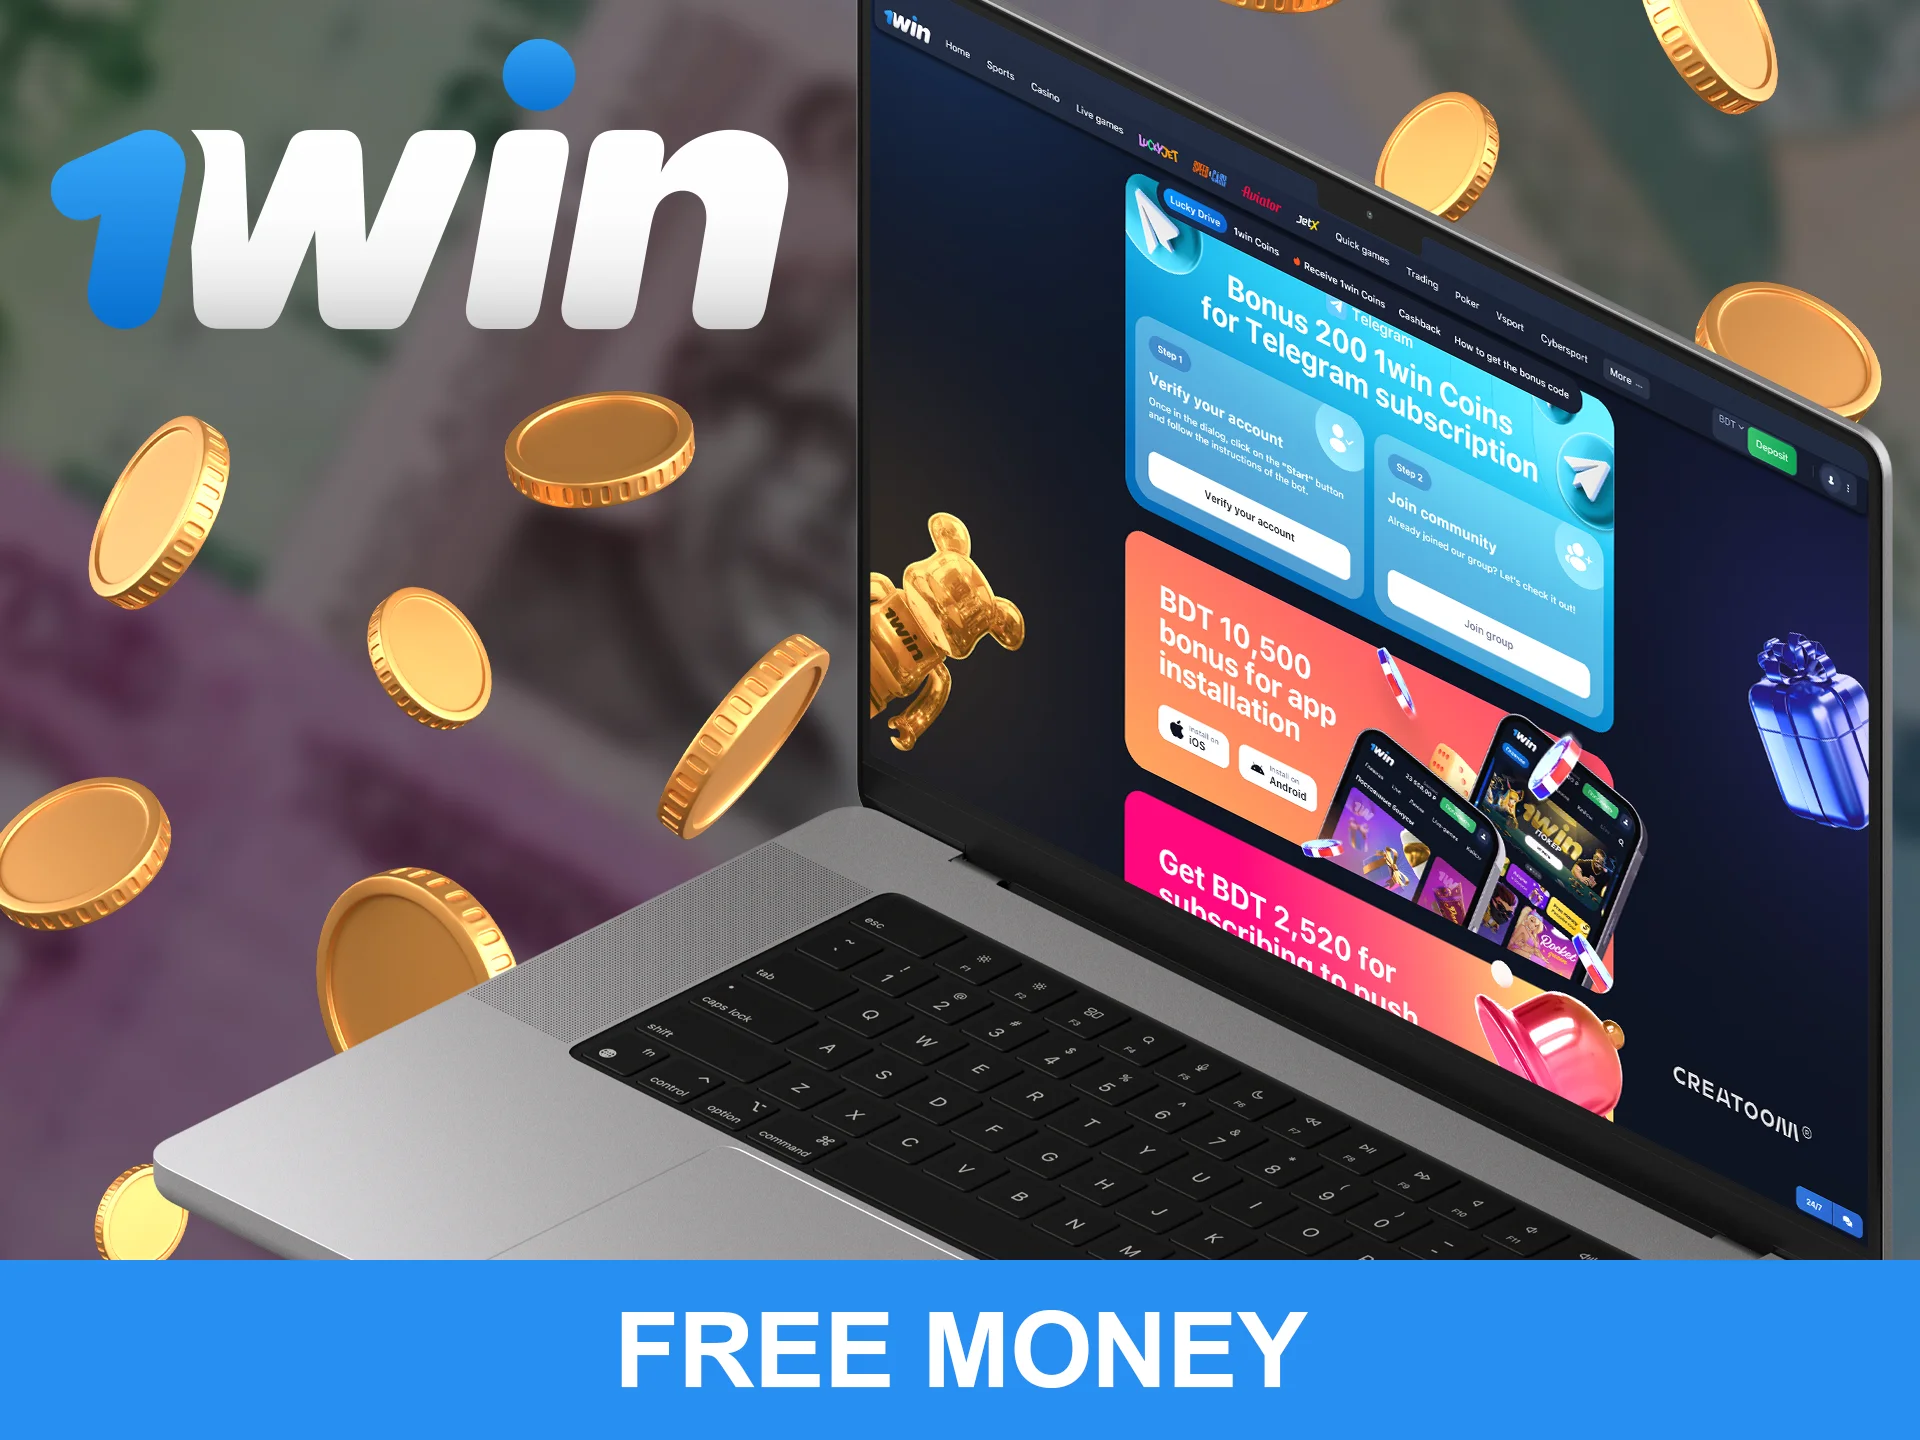 Complete tasks to get free money from 1win.